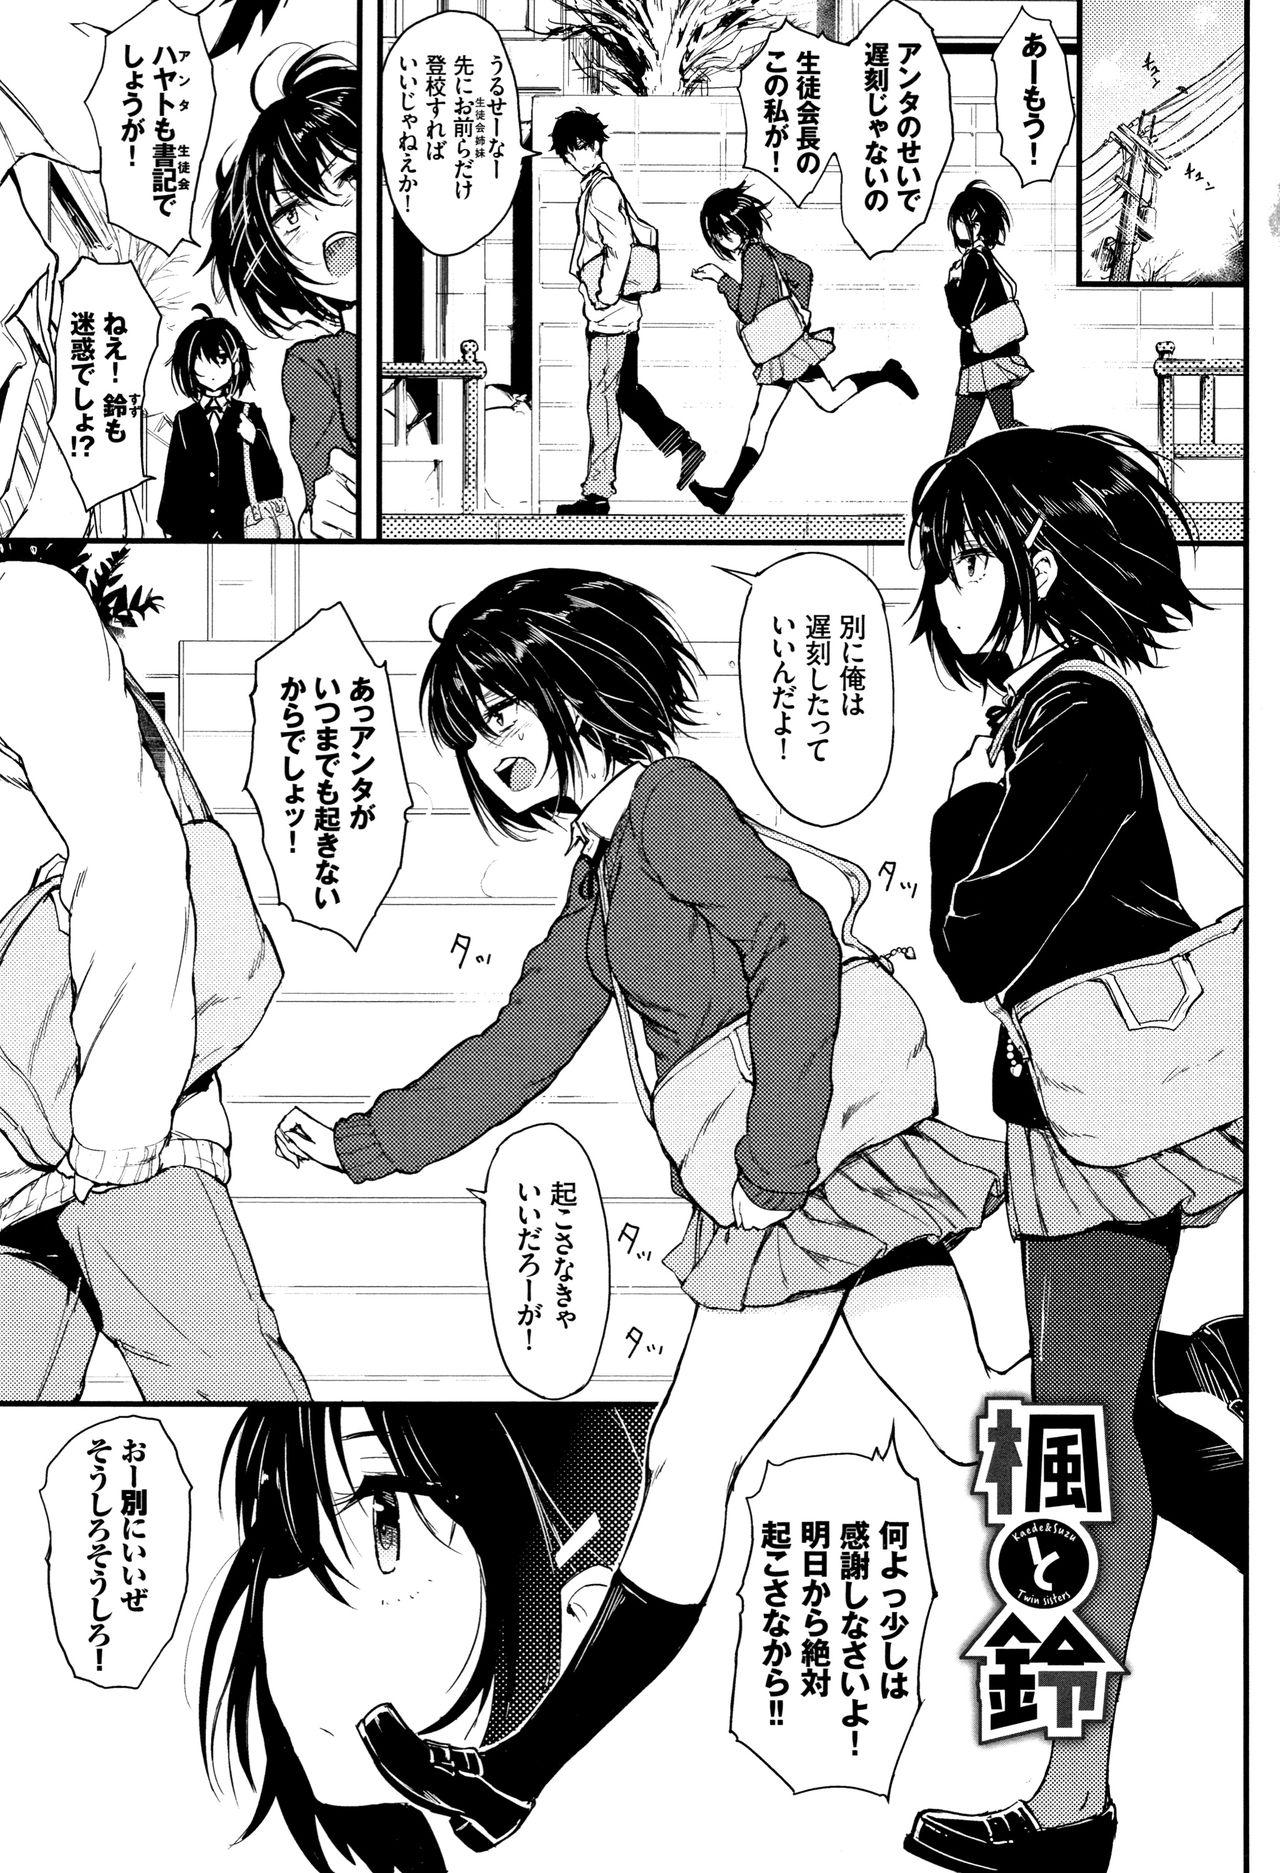 Kaede to Suzu Ch.1-3 Page 1 Of 72 hentai haven, Kaede to Suzu Ch.1-3 Page.....